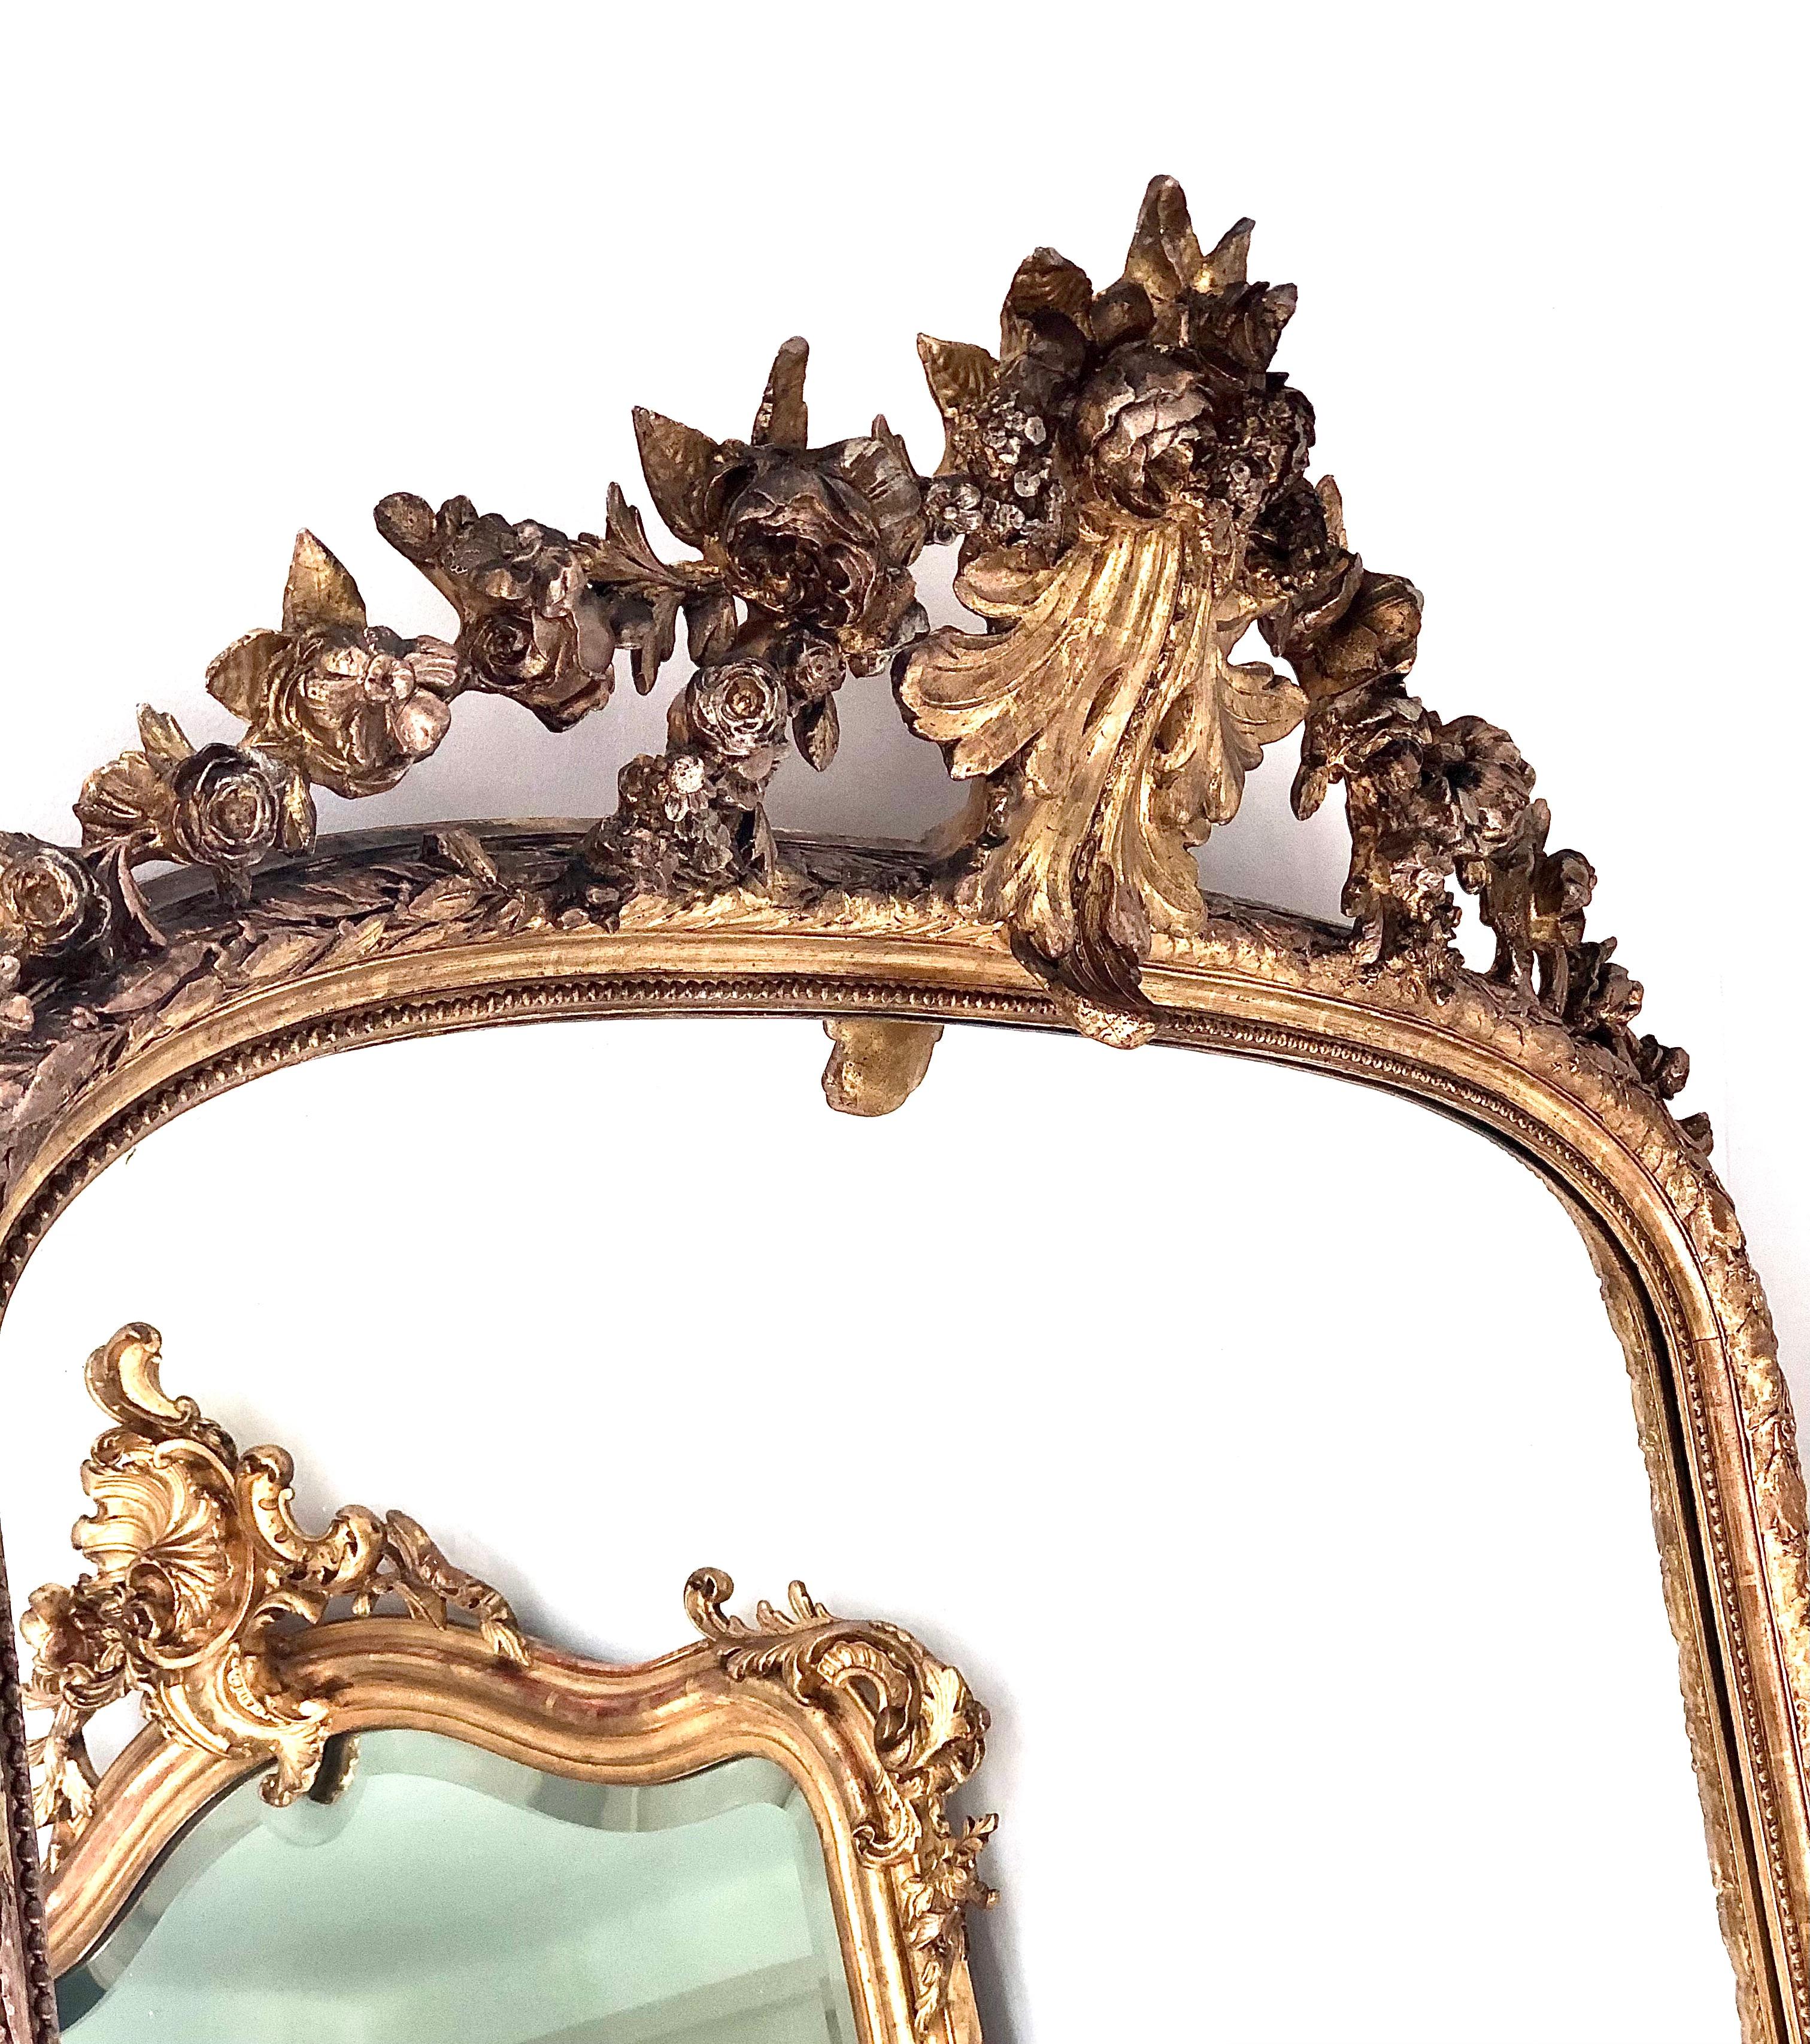 An elegant 19th century gild Louis XVI style Mirror, French Napoleon period, retaining the original mirror plate, the wide frame decorated with a string of pearls and a foliage of Olive Tree, surmounted by a Central leaf and a farandole of delicate